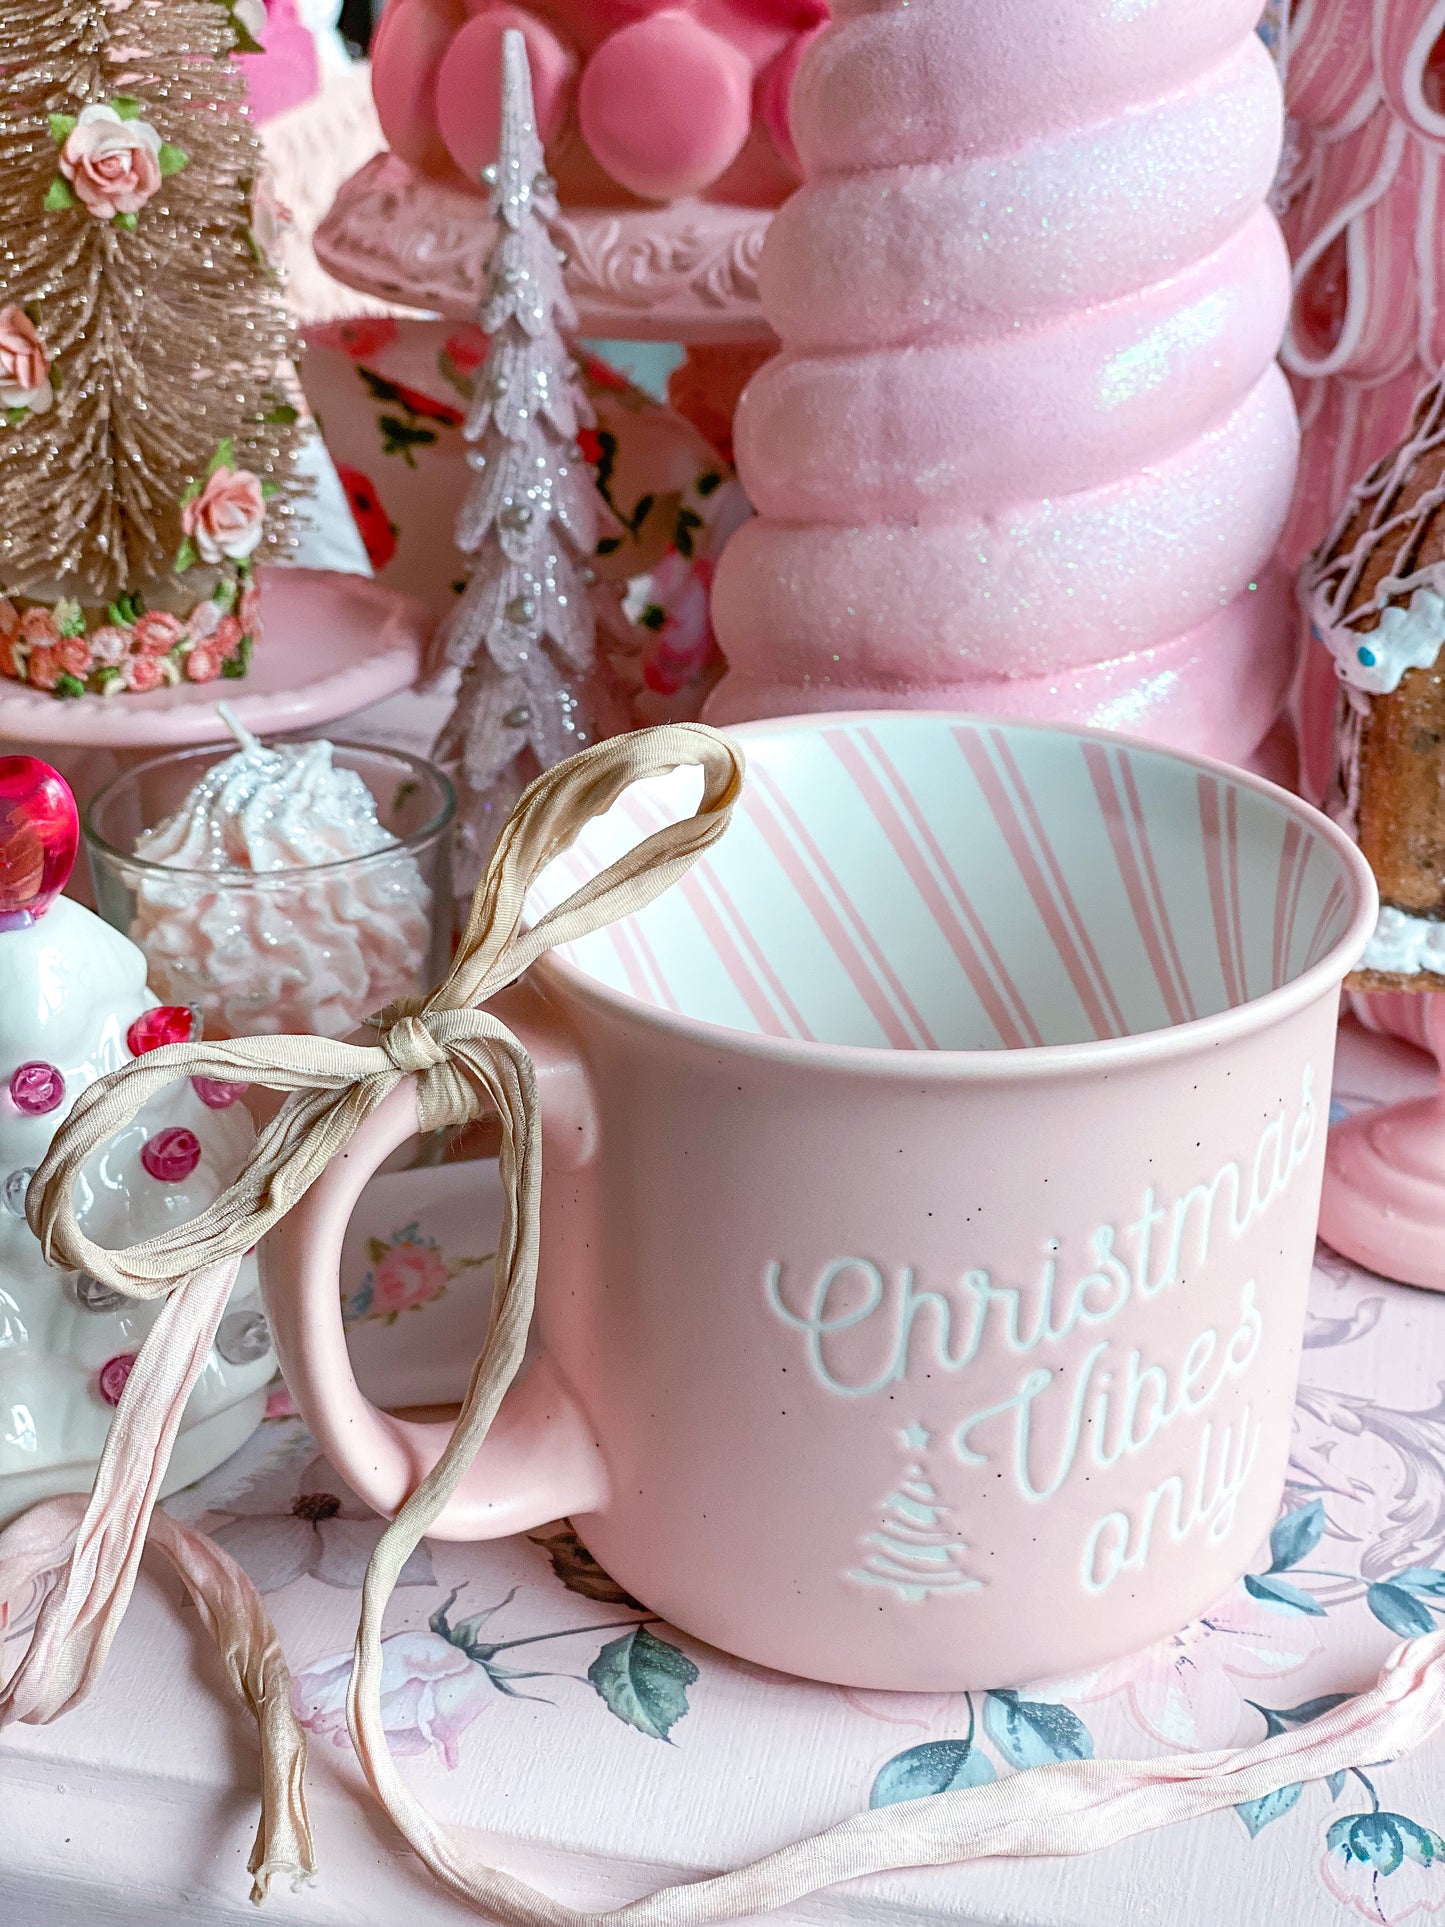 Pink Christmas Vibes Only Tasse